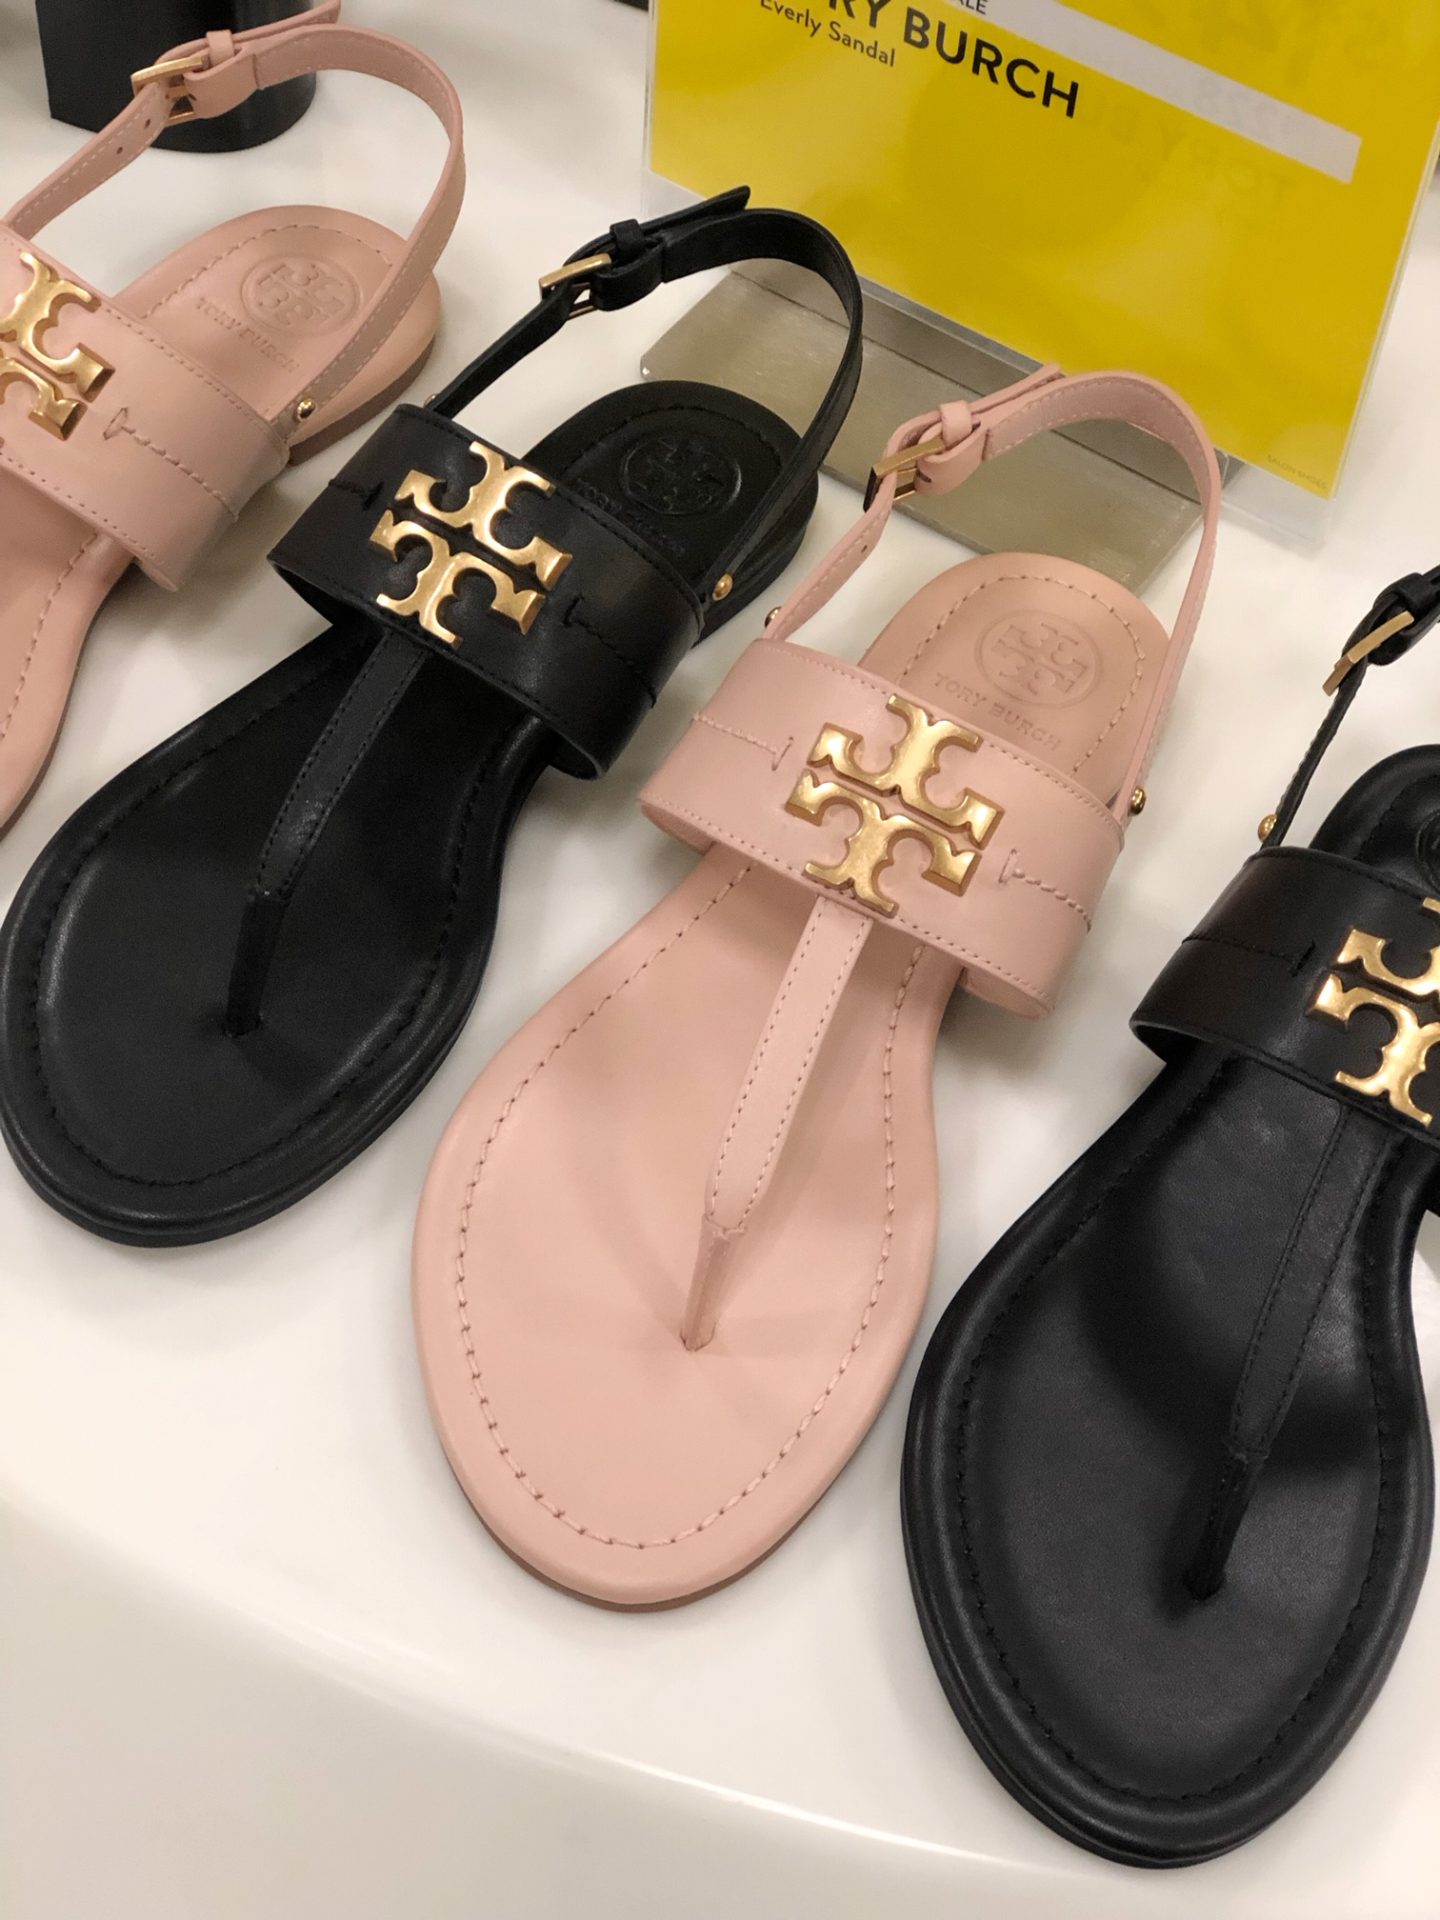 Tory burch Everly sandals Nsale 2019 The Double Take Girls